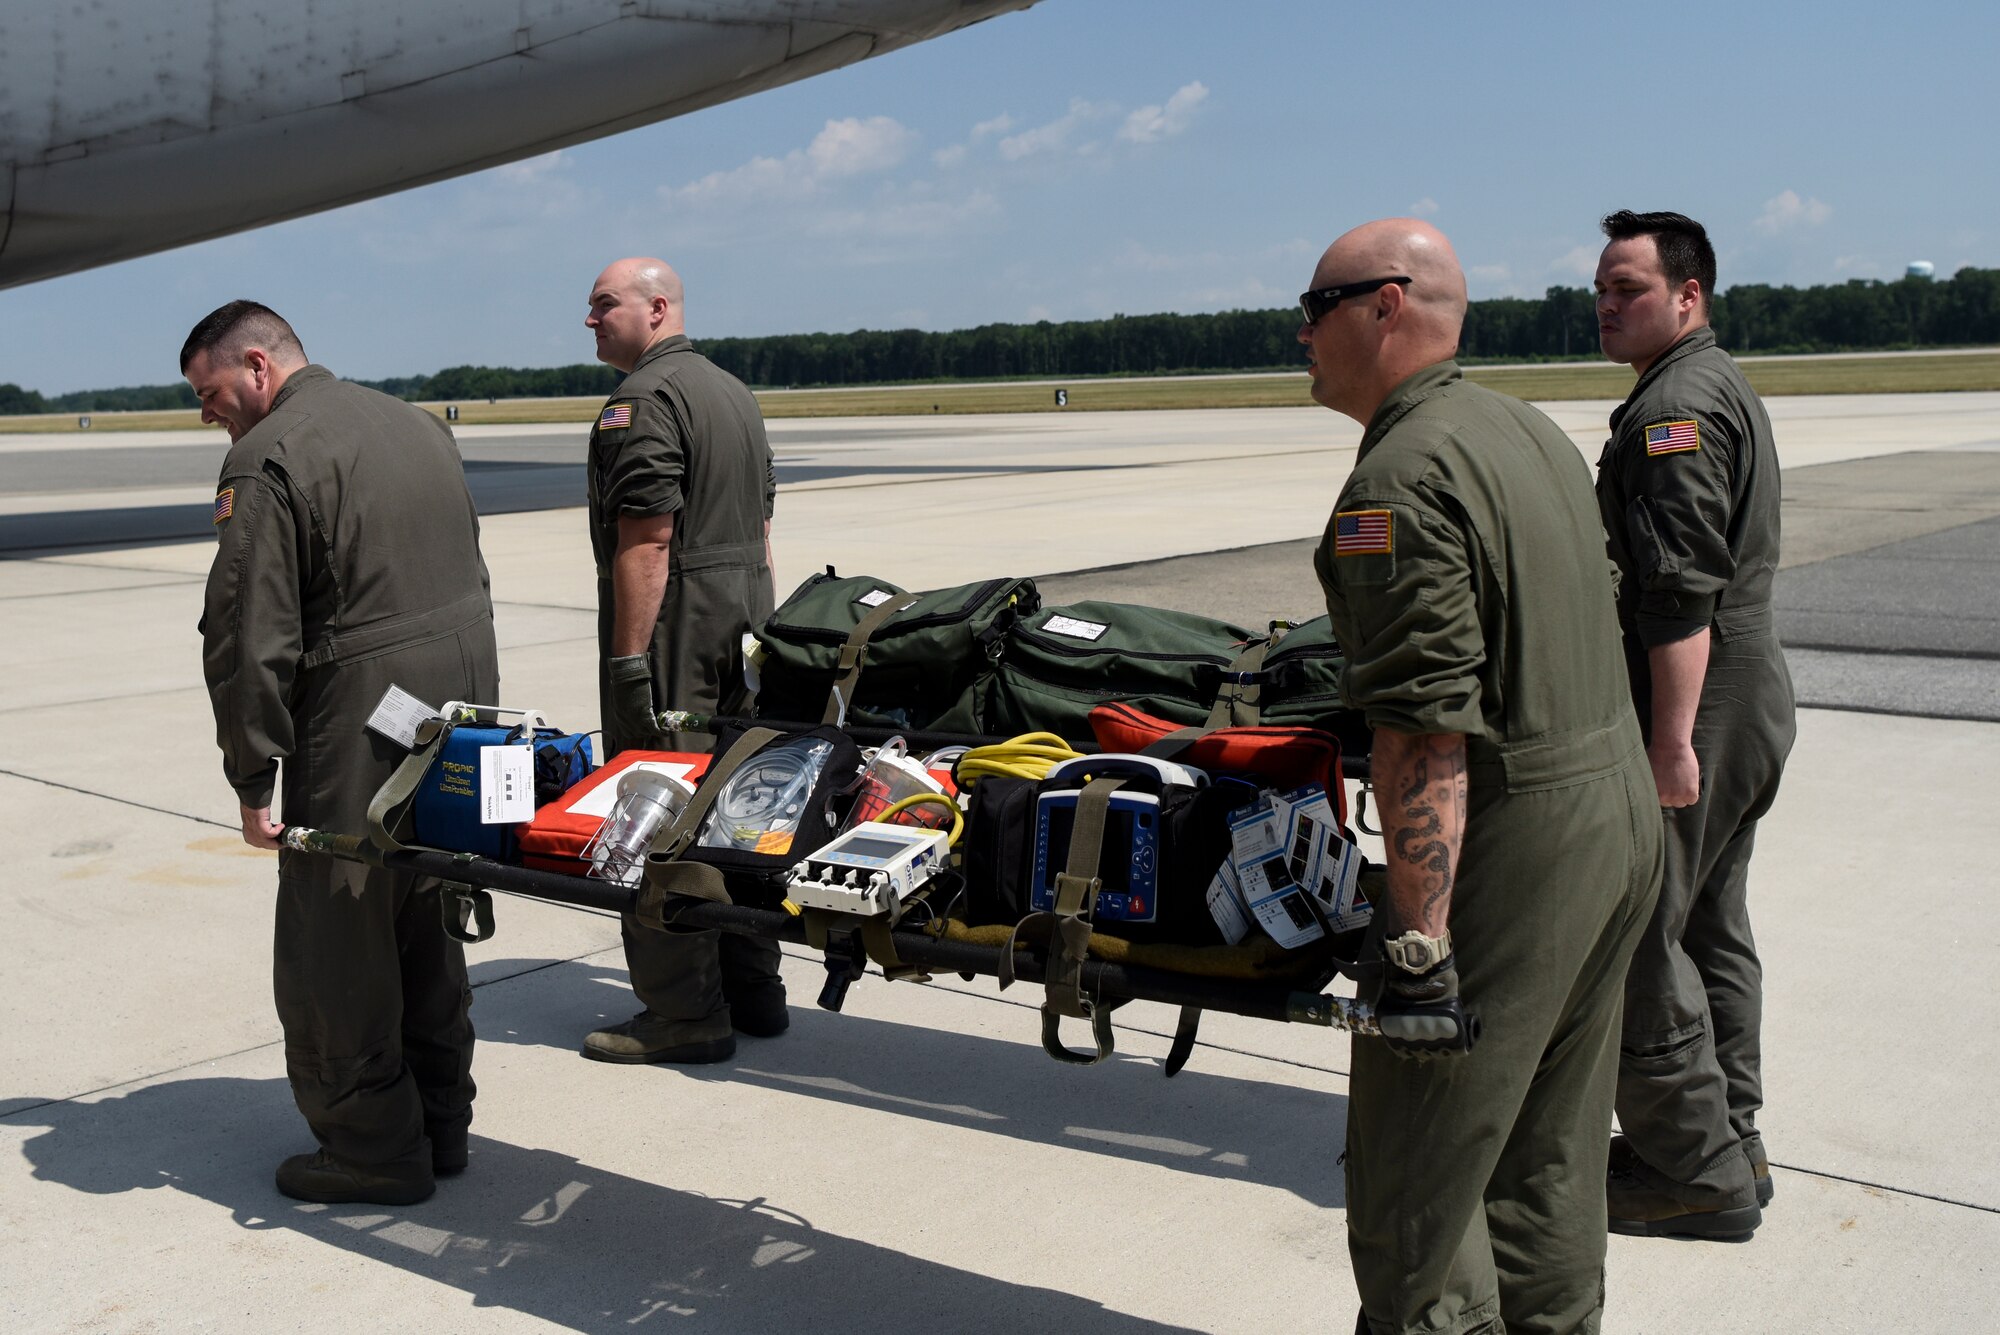 Airmen from the Delaware Air National Guard 142nd Aeromedical Evacuation Squadron carry stretchers with medical equipment July 12, 2018, at Dover Air Force Base, Del. The 142nd AES teamed up with the 9th Airlift Squadron to train aeromedical evacuation procedures on a C-5M Super Galaxy. The 142nd AES is stationed at New Castle Air National Guard Base, Del. (U.S. Air Force photo by Airman 1st Class Zoe M. Wockenfuss)